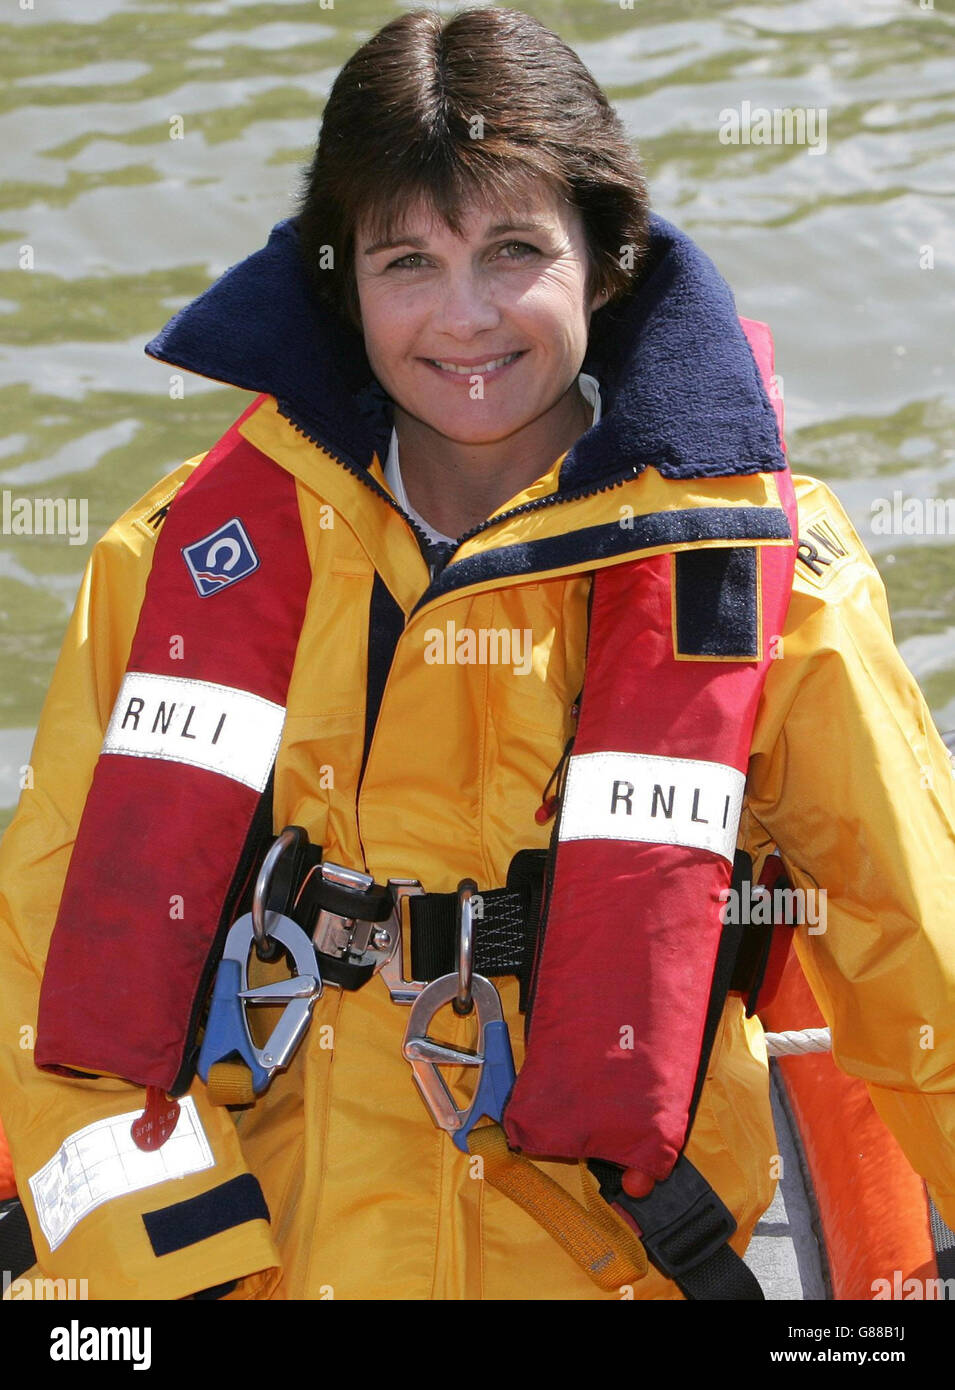 RNLI Lifeboat woman Aileen Jones of Porthcawl lifeboat station, who is the first woman in 116 years to receive an RNLI bravery award. Stock Photo